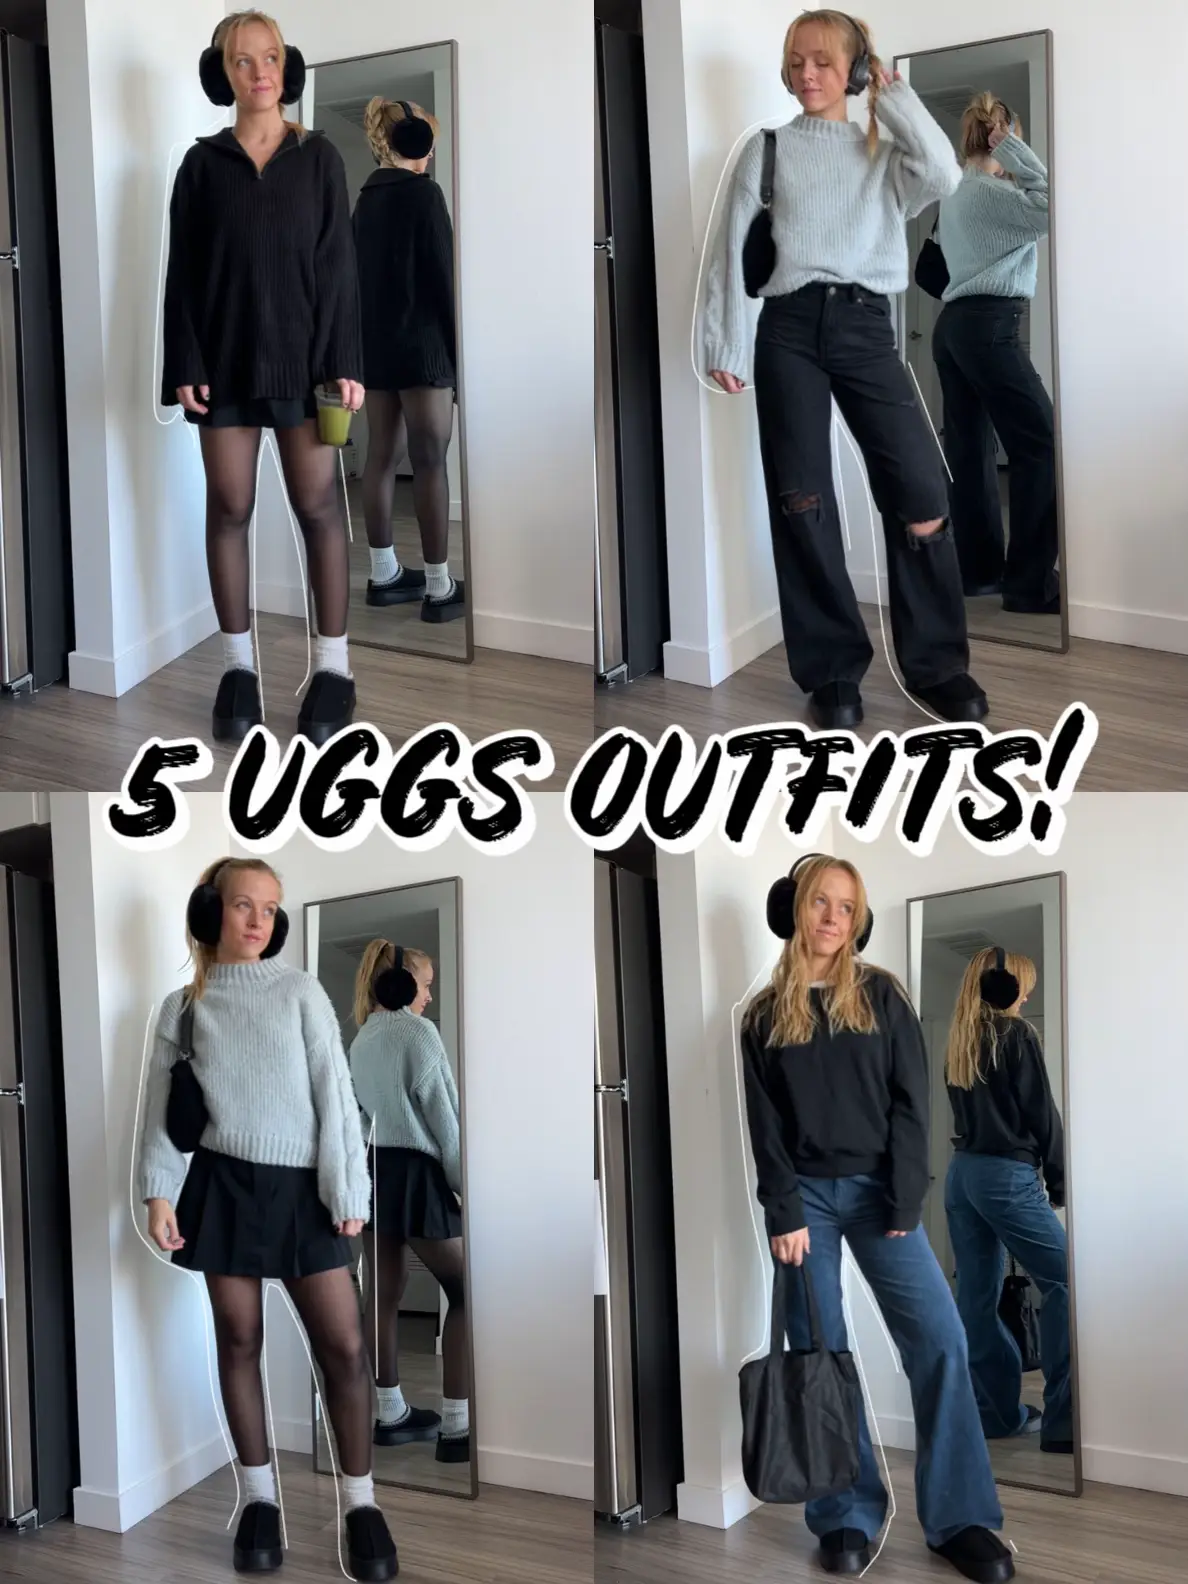 140 Best Uggs Outfit ideas  casual outfits, cute outfits, uggs outfit